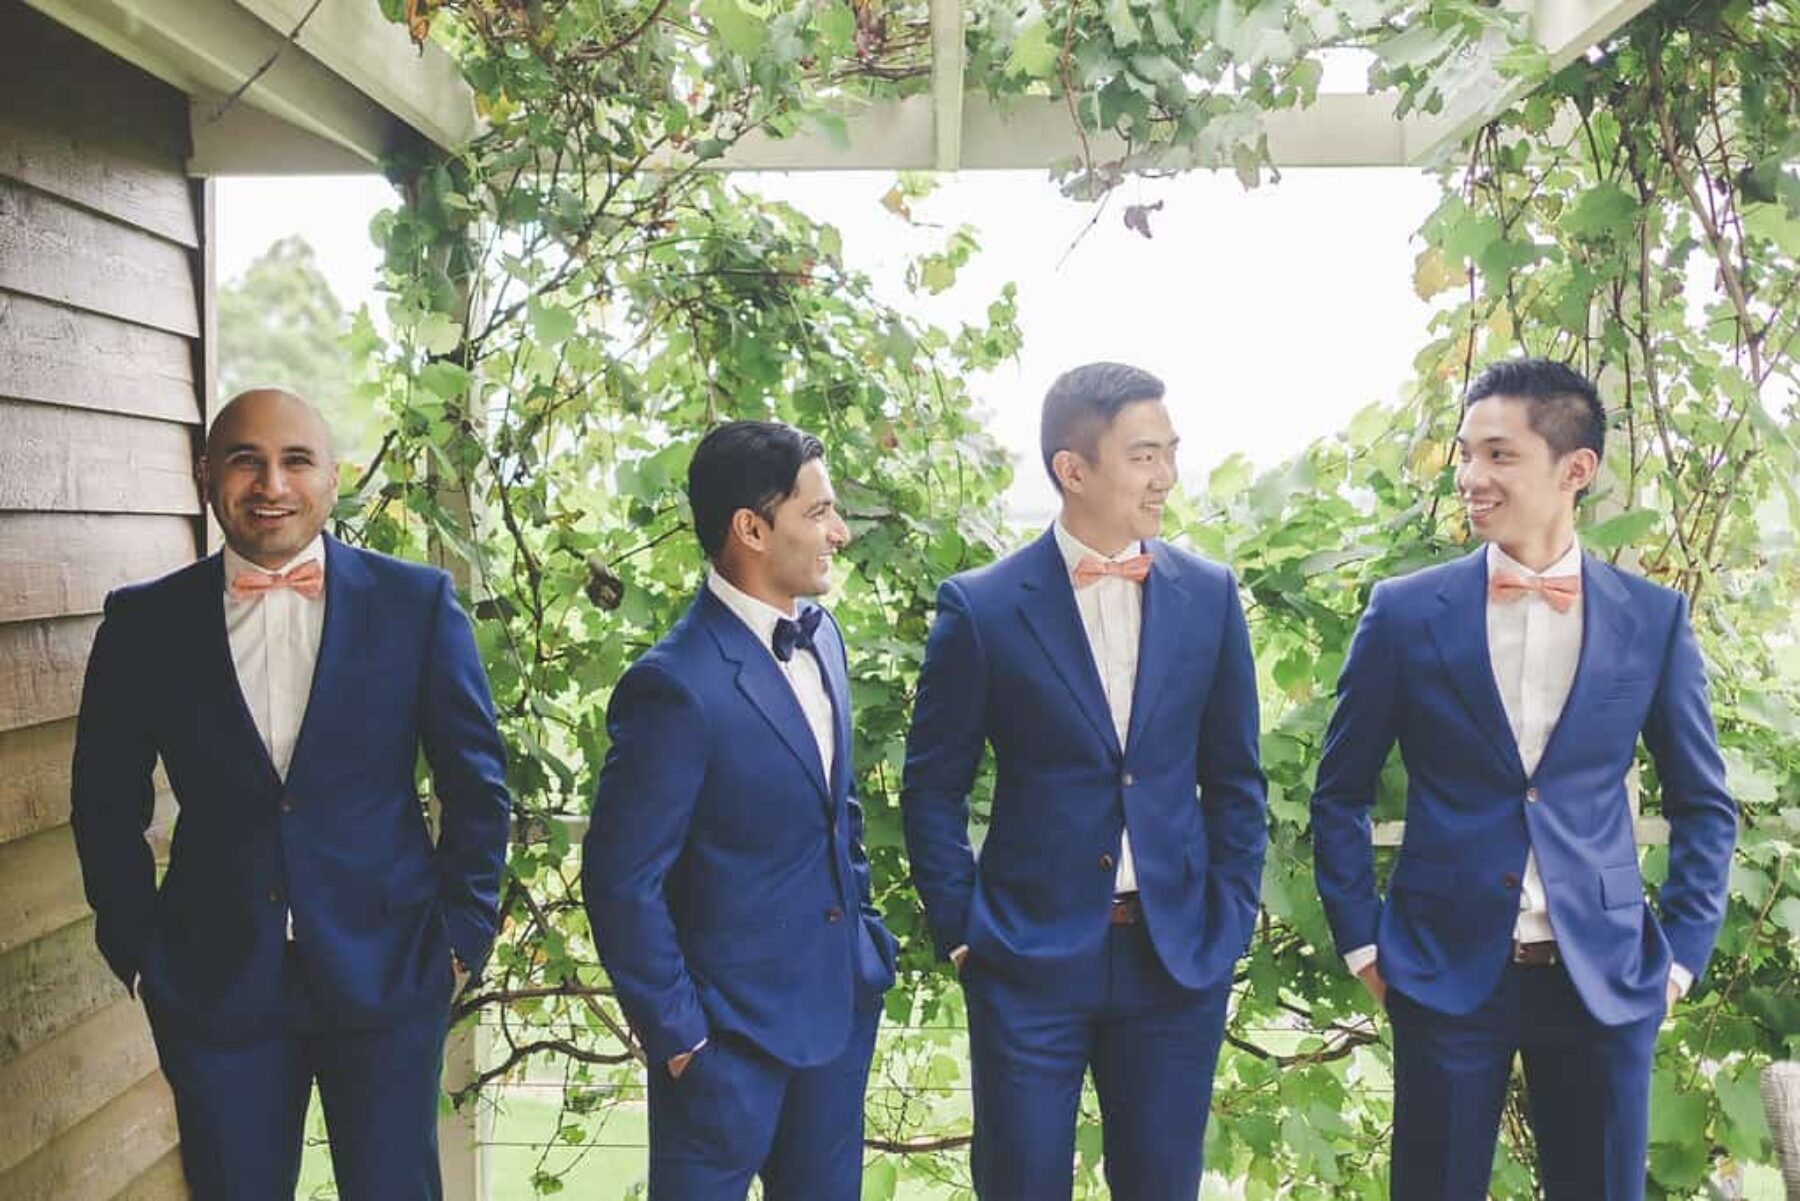 groomsmen in blue suits and bow ties